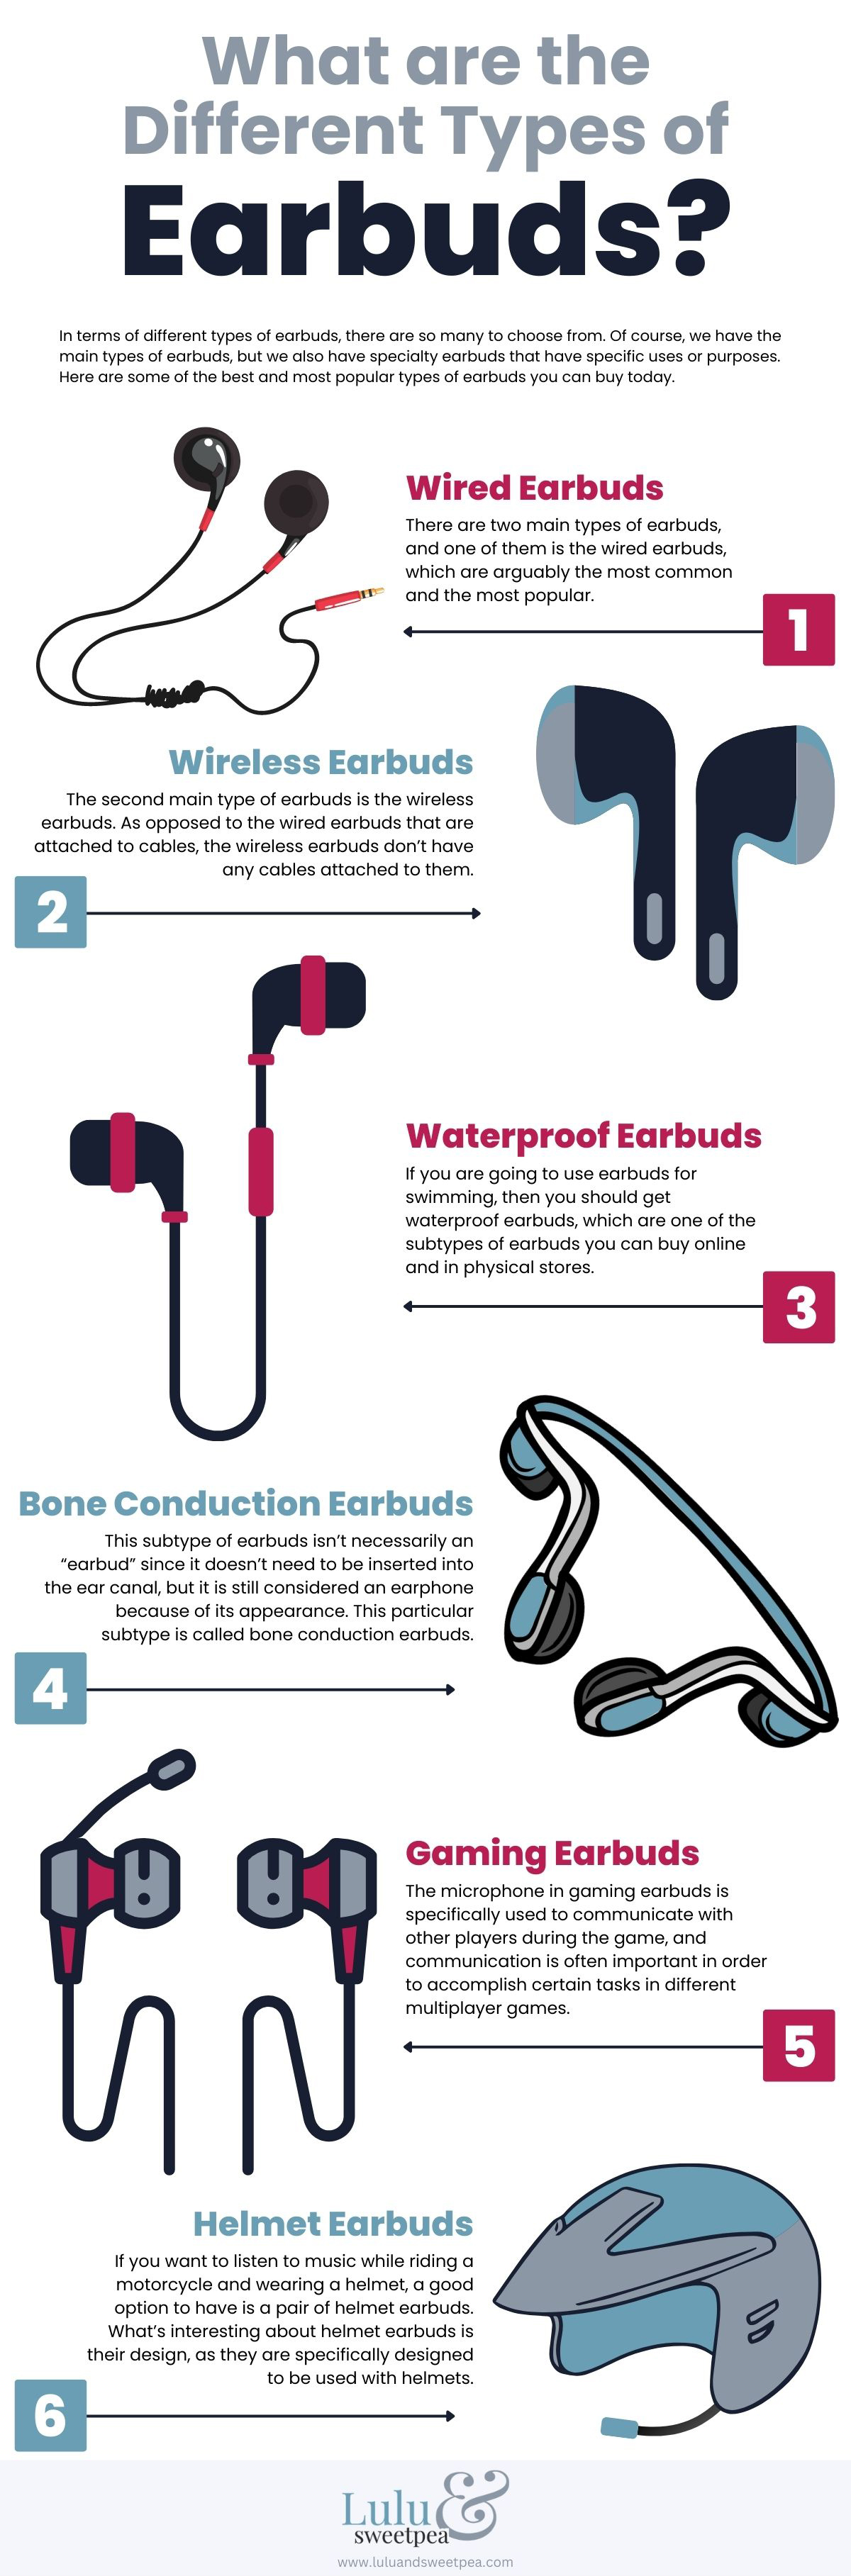 What are the Different Types of Earbuds